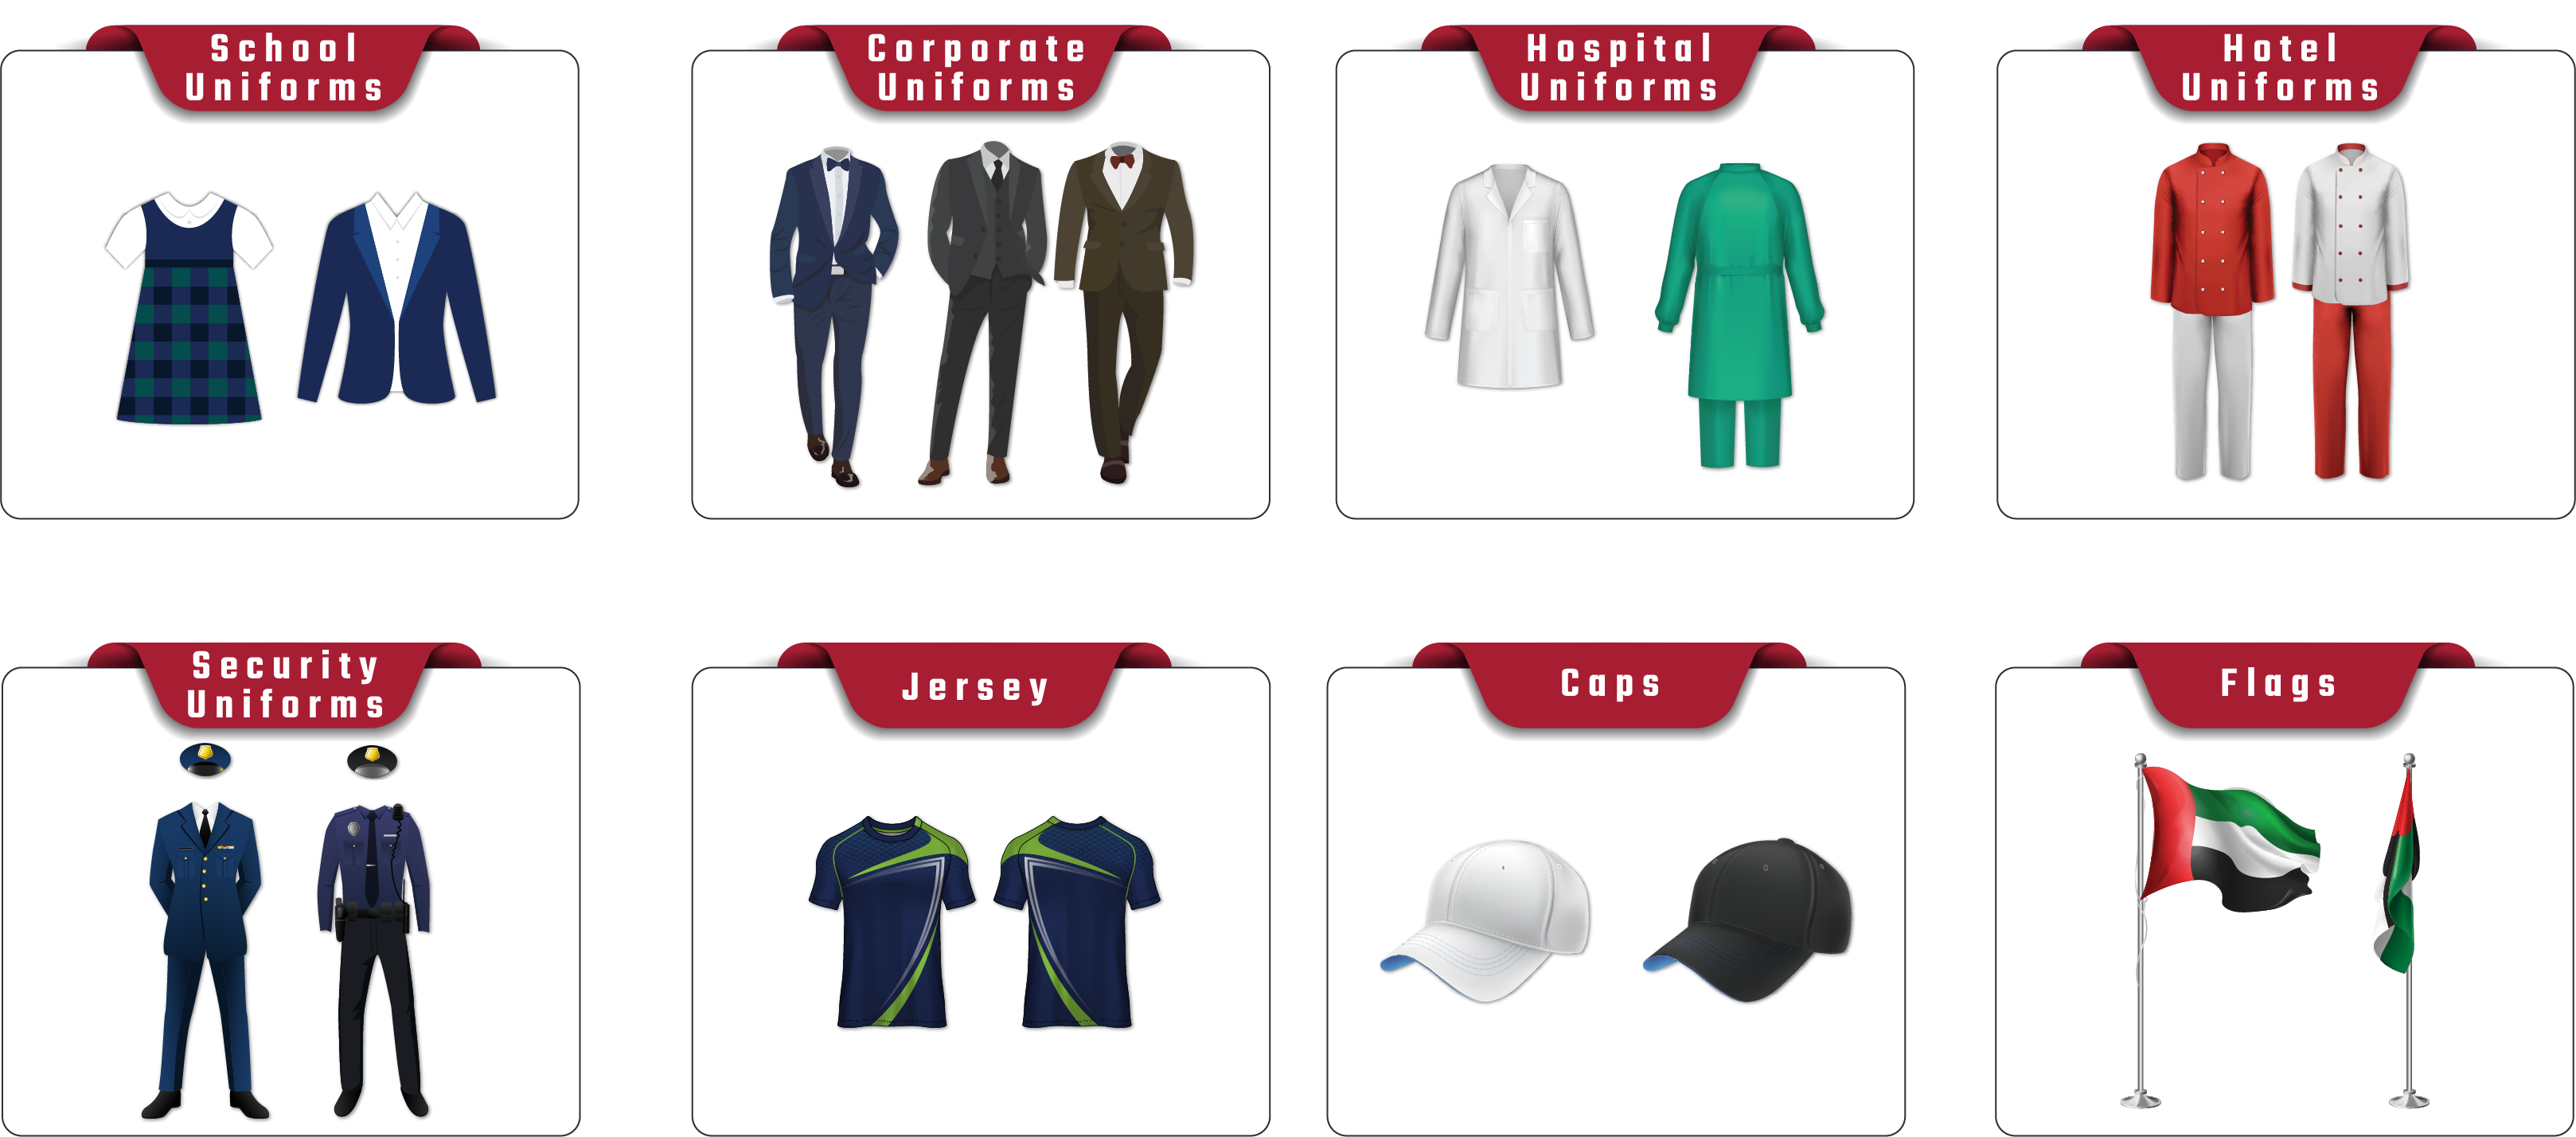 %Jagad Uniforms is known for Perfect stitching. Color Fastness, Shrinkage free fabric and Excellent finishing.%